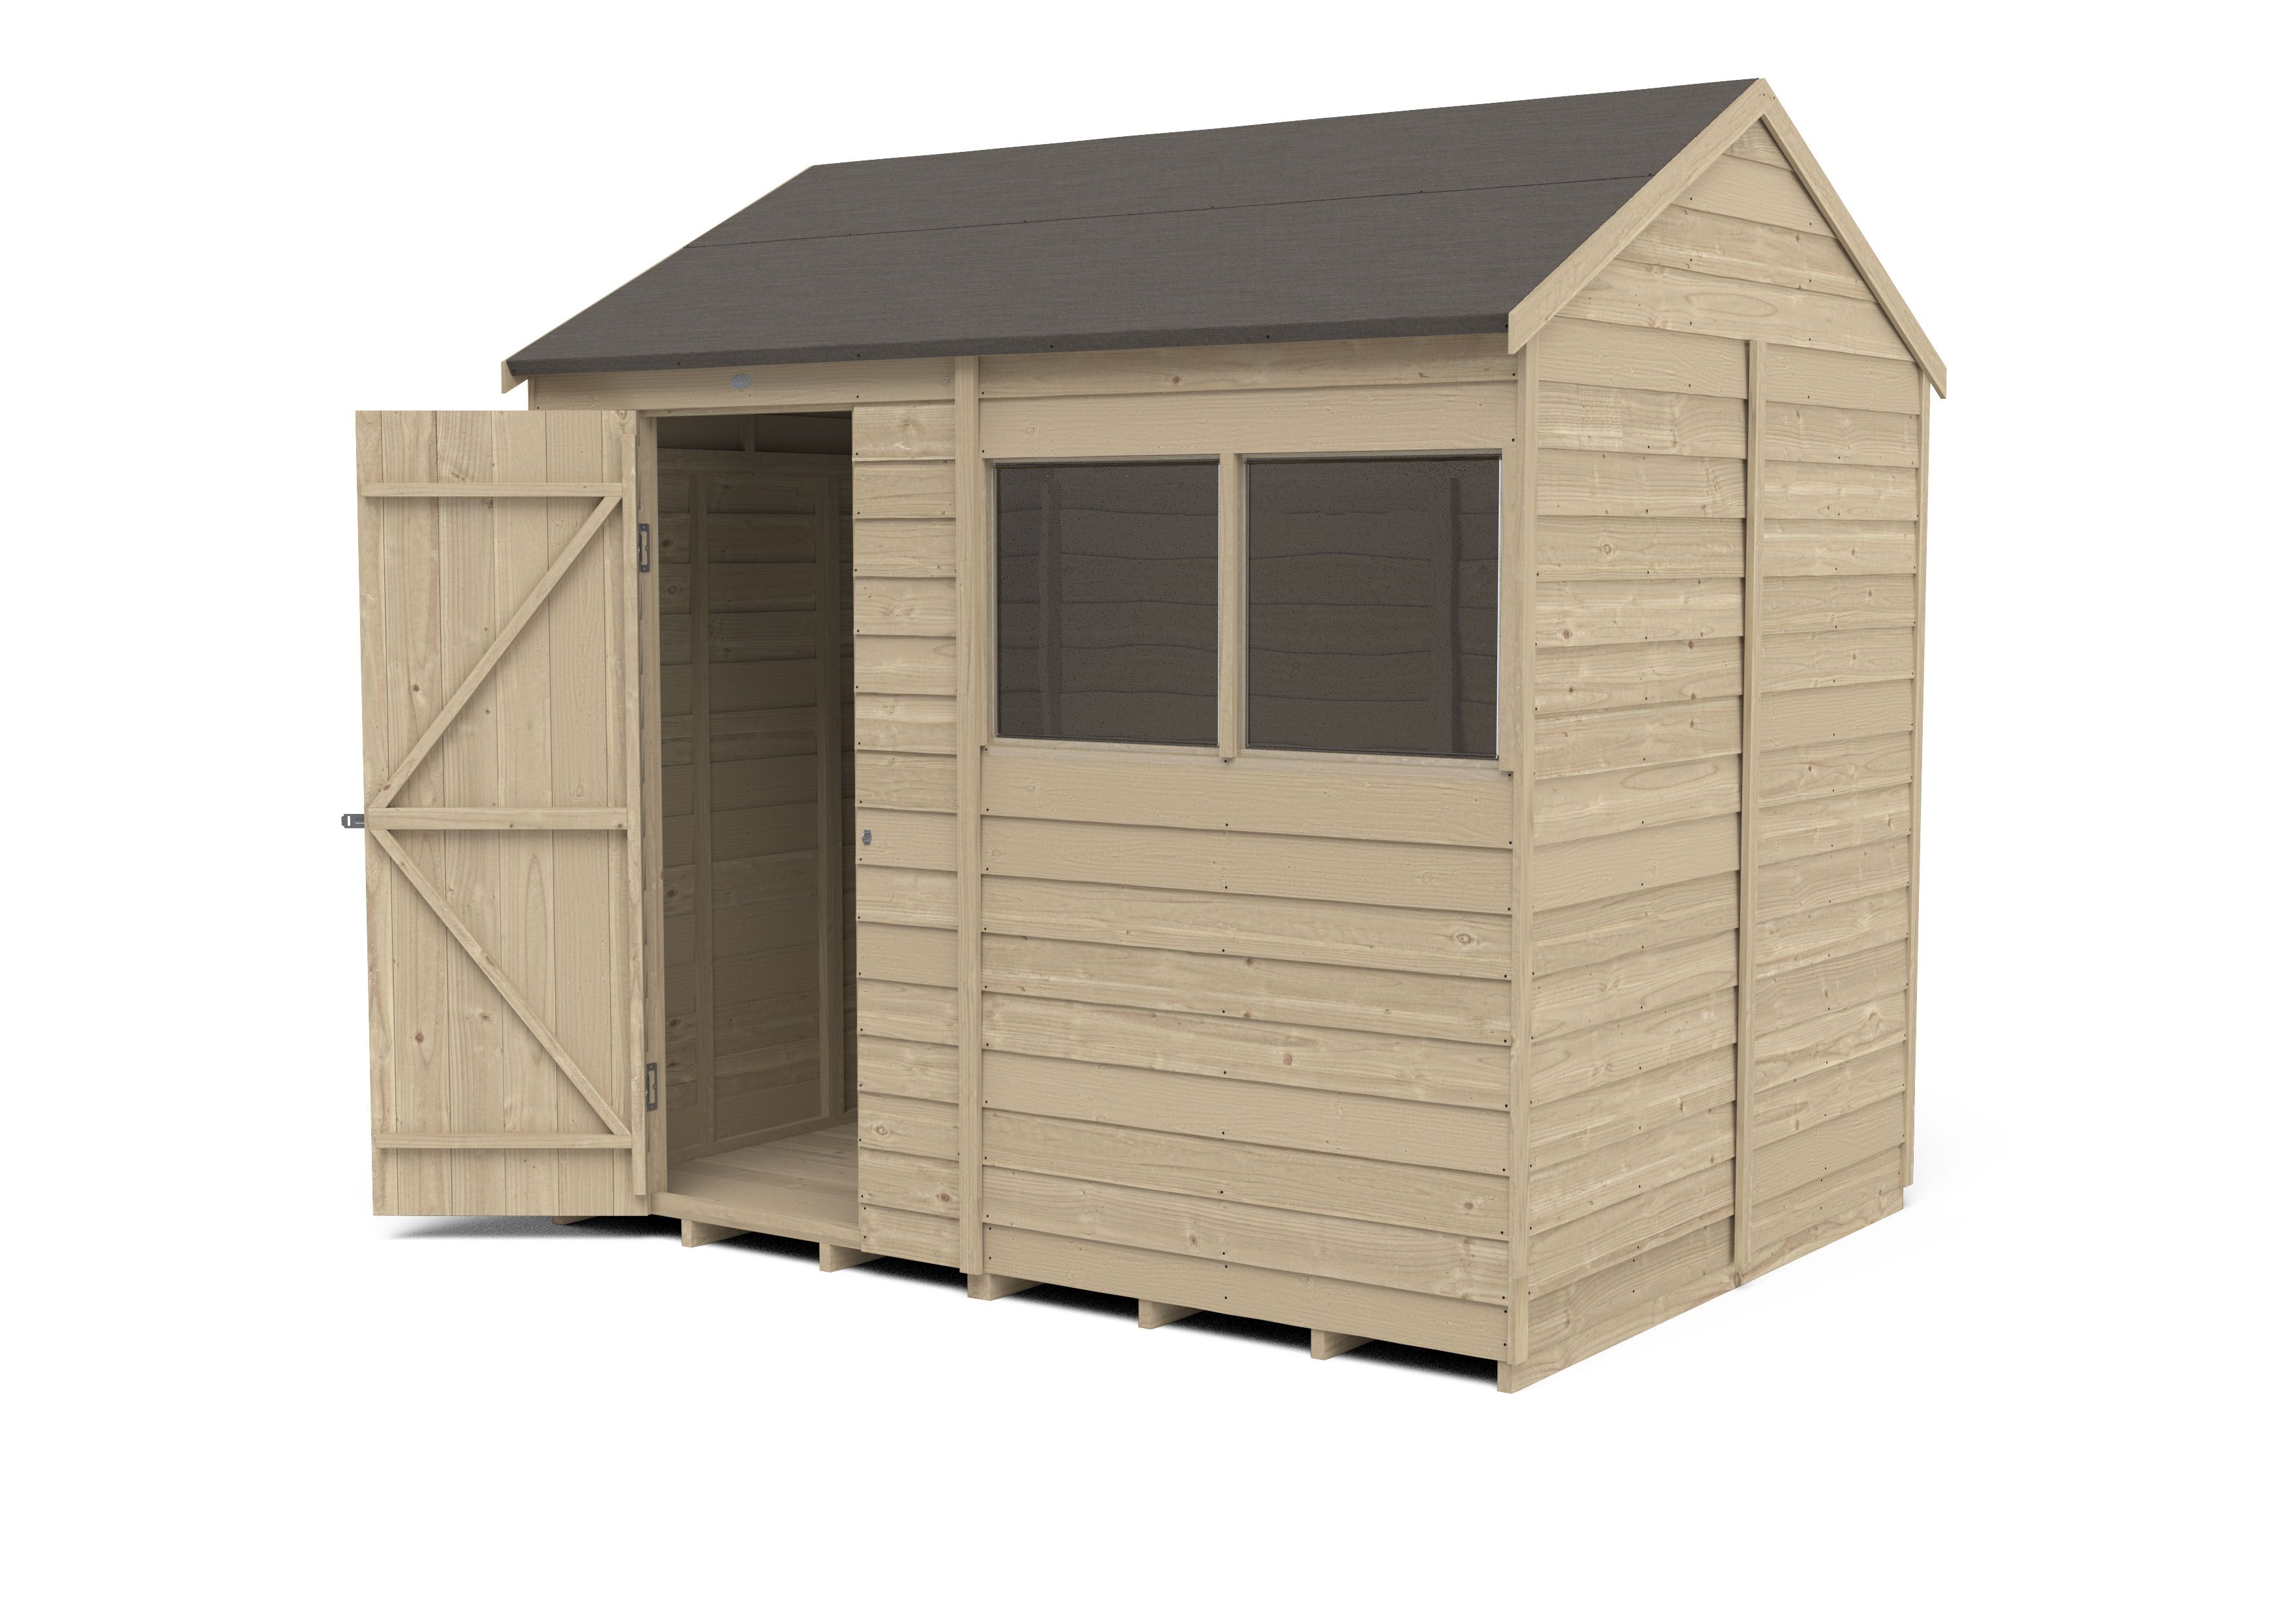 Forest Garden Overlap 8x6 ft Reverse apex Wooden Pressure treated Shed with floor & 2 windows (Base included) - Assembly service included